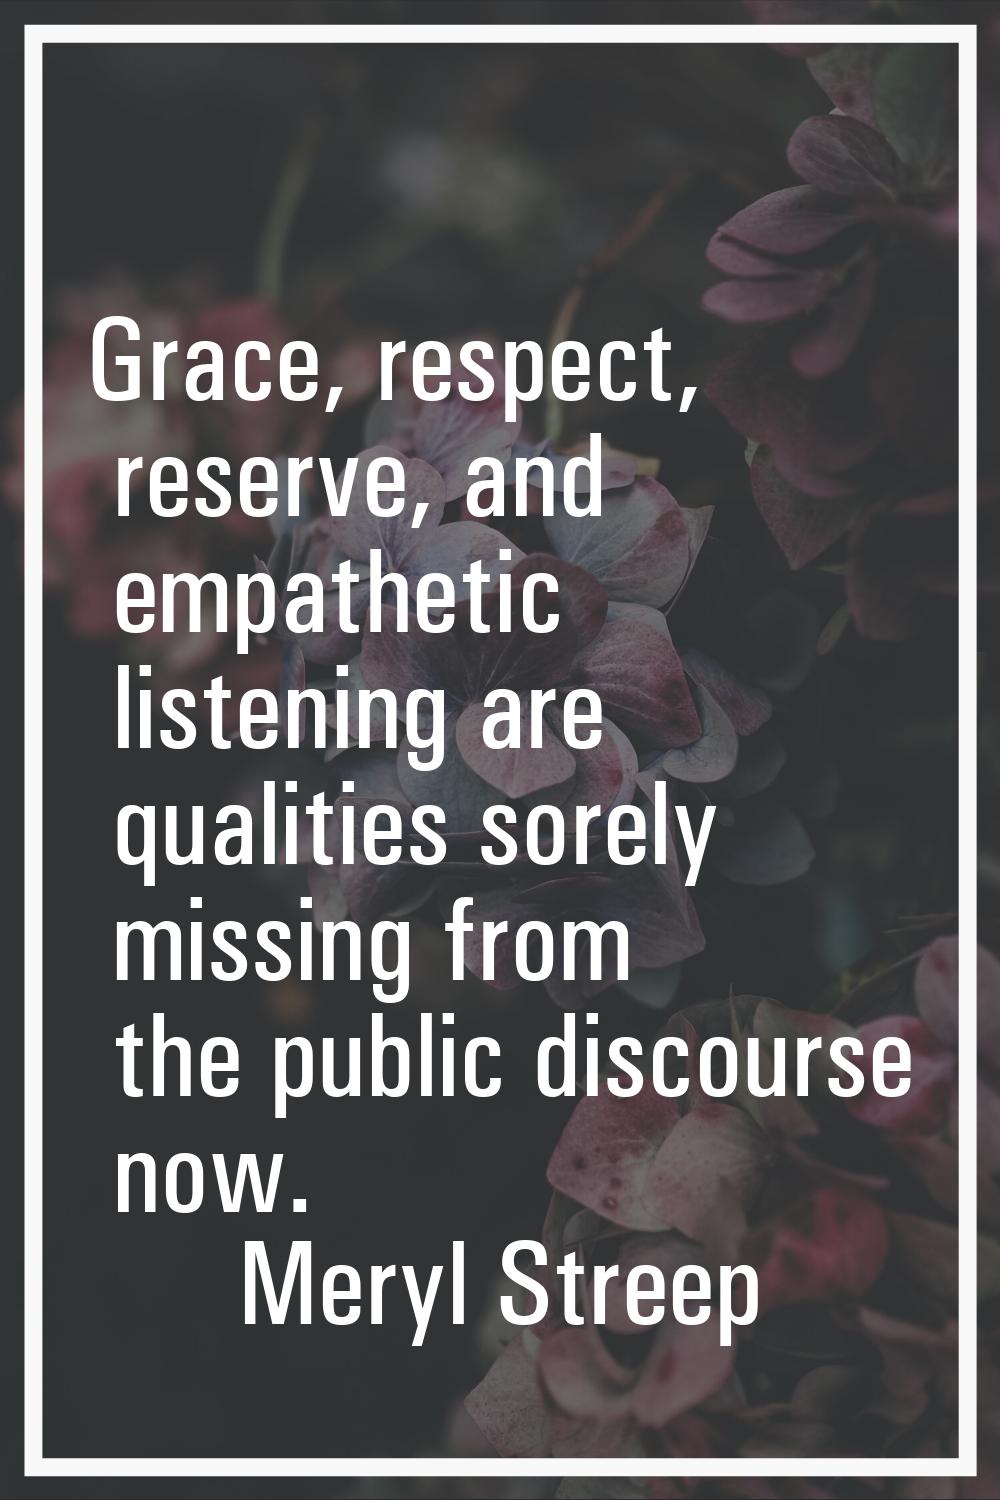 Grace, respect, reserve, and empathetic listening are qualities sorely missing from the public disc